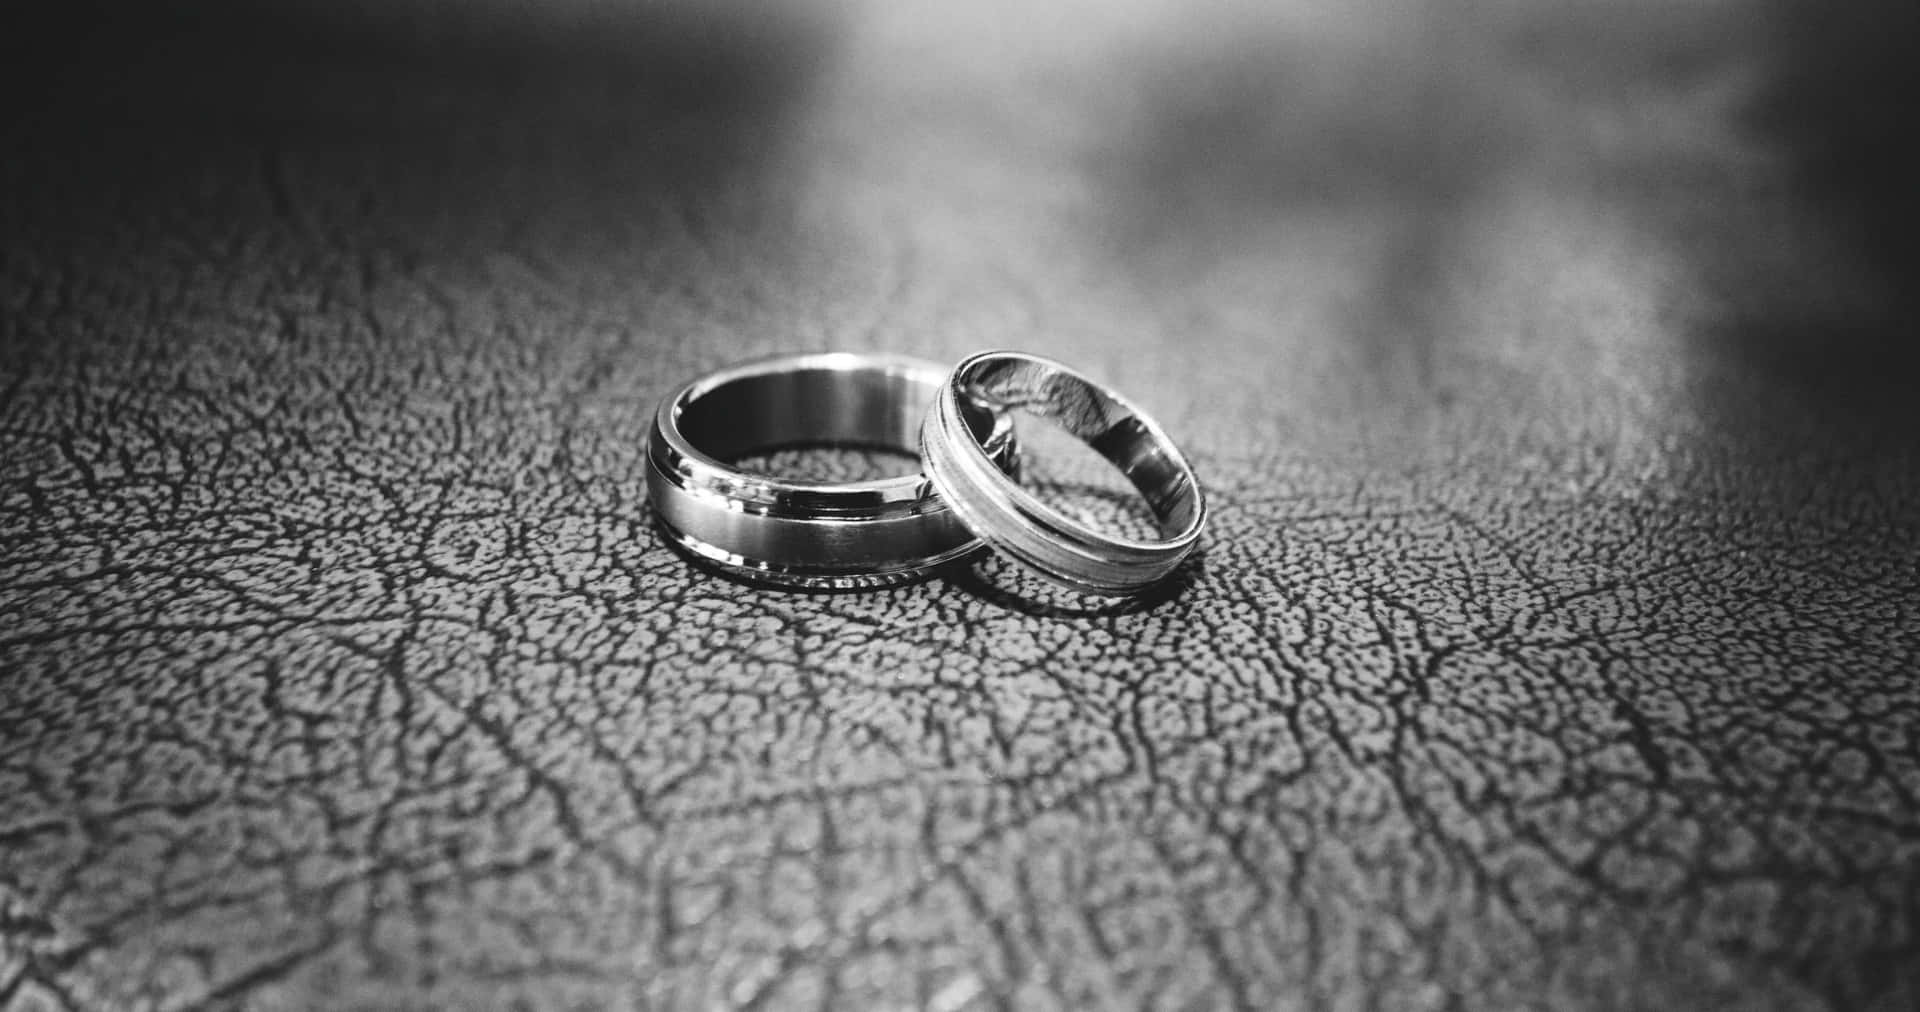 Monochrome Wedding Rings Picture